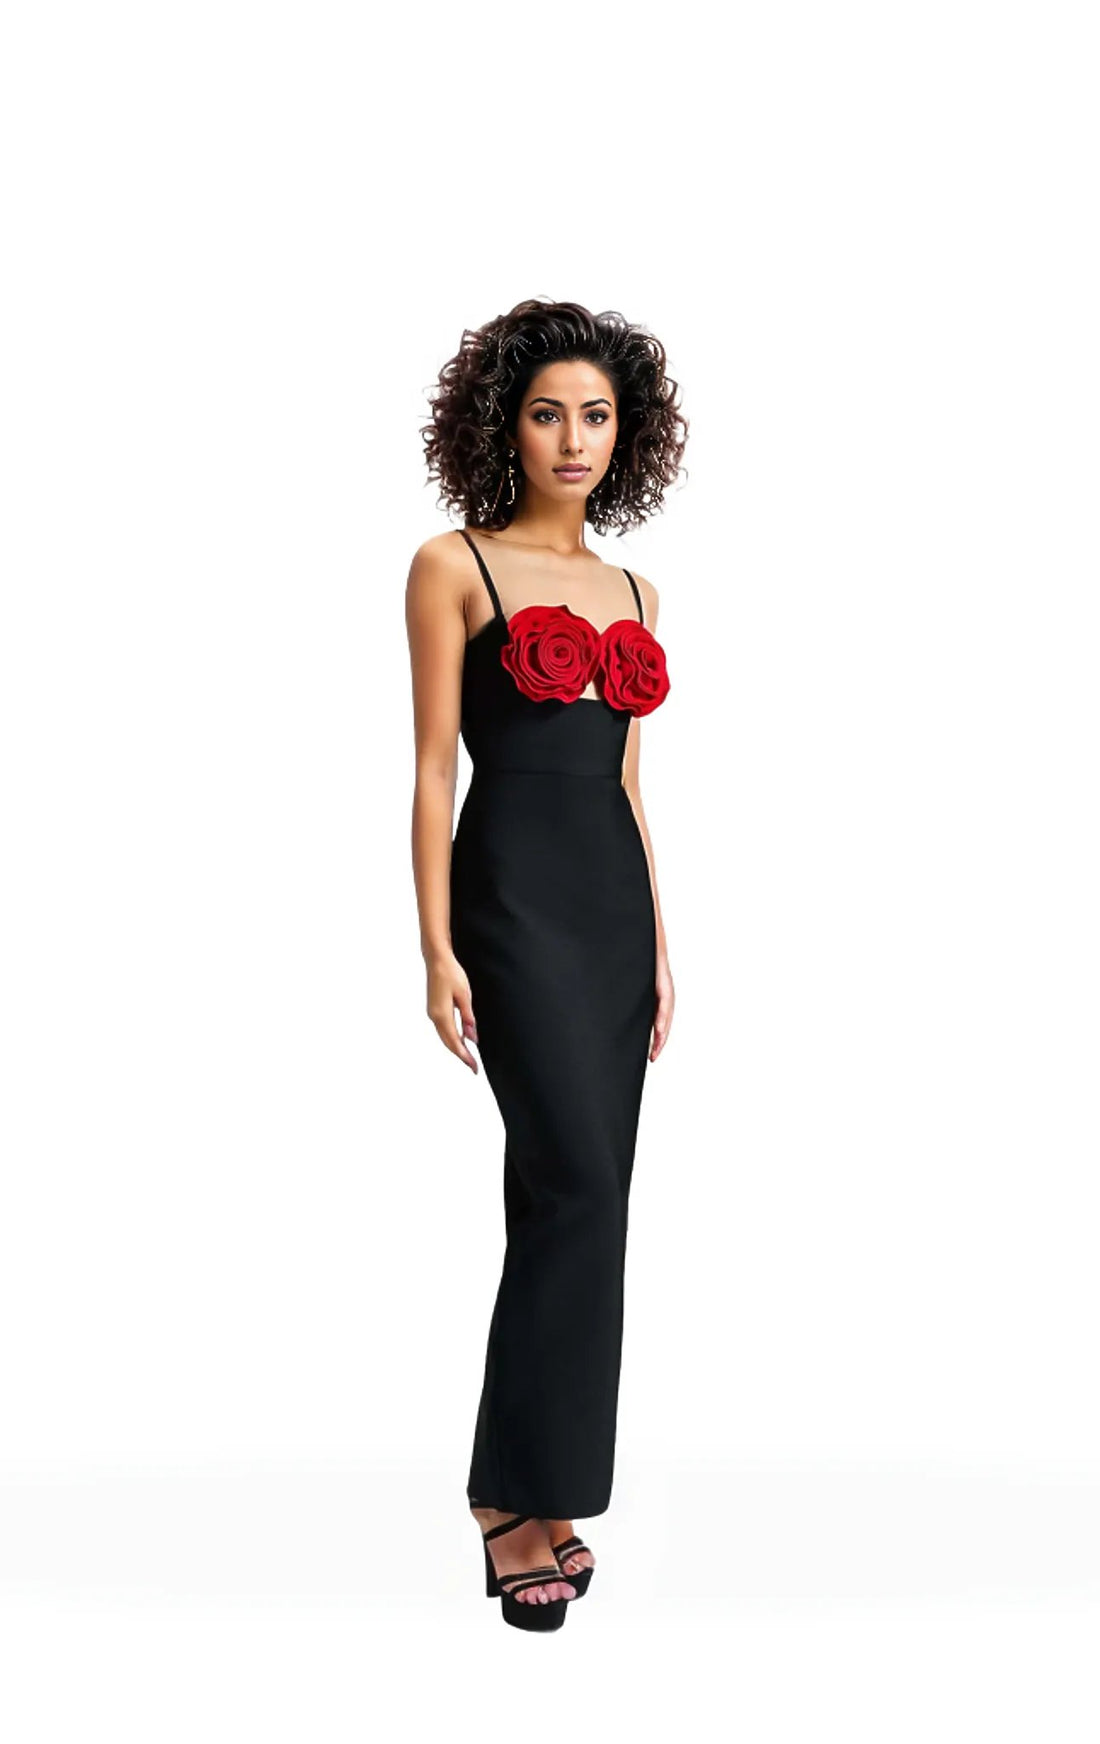 Elegant Black Evening Gown with Floral Accents - Mabel Love Co